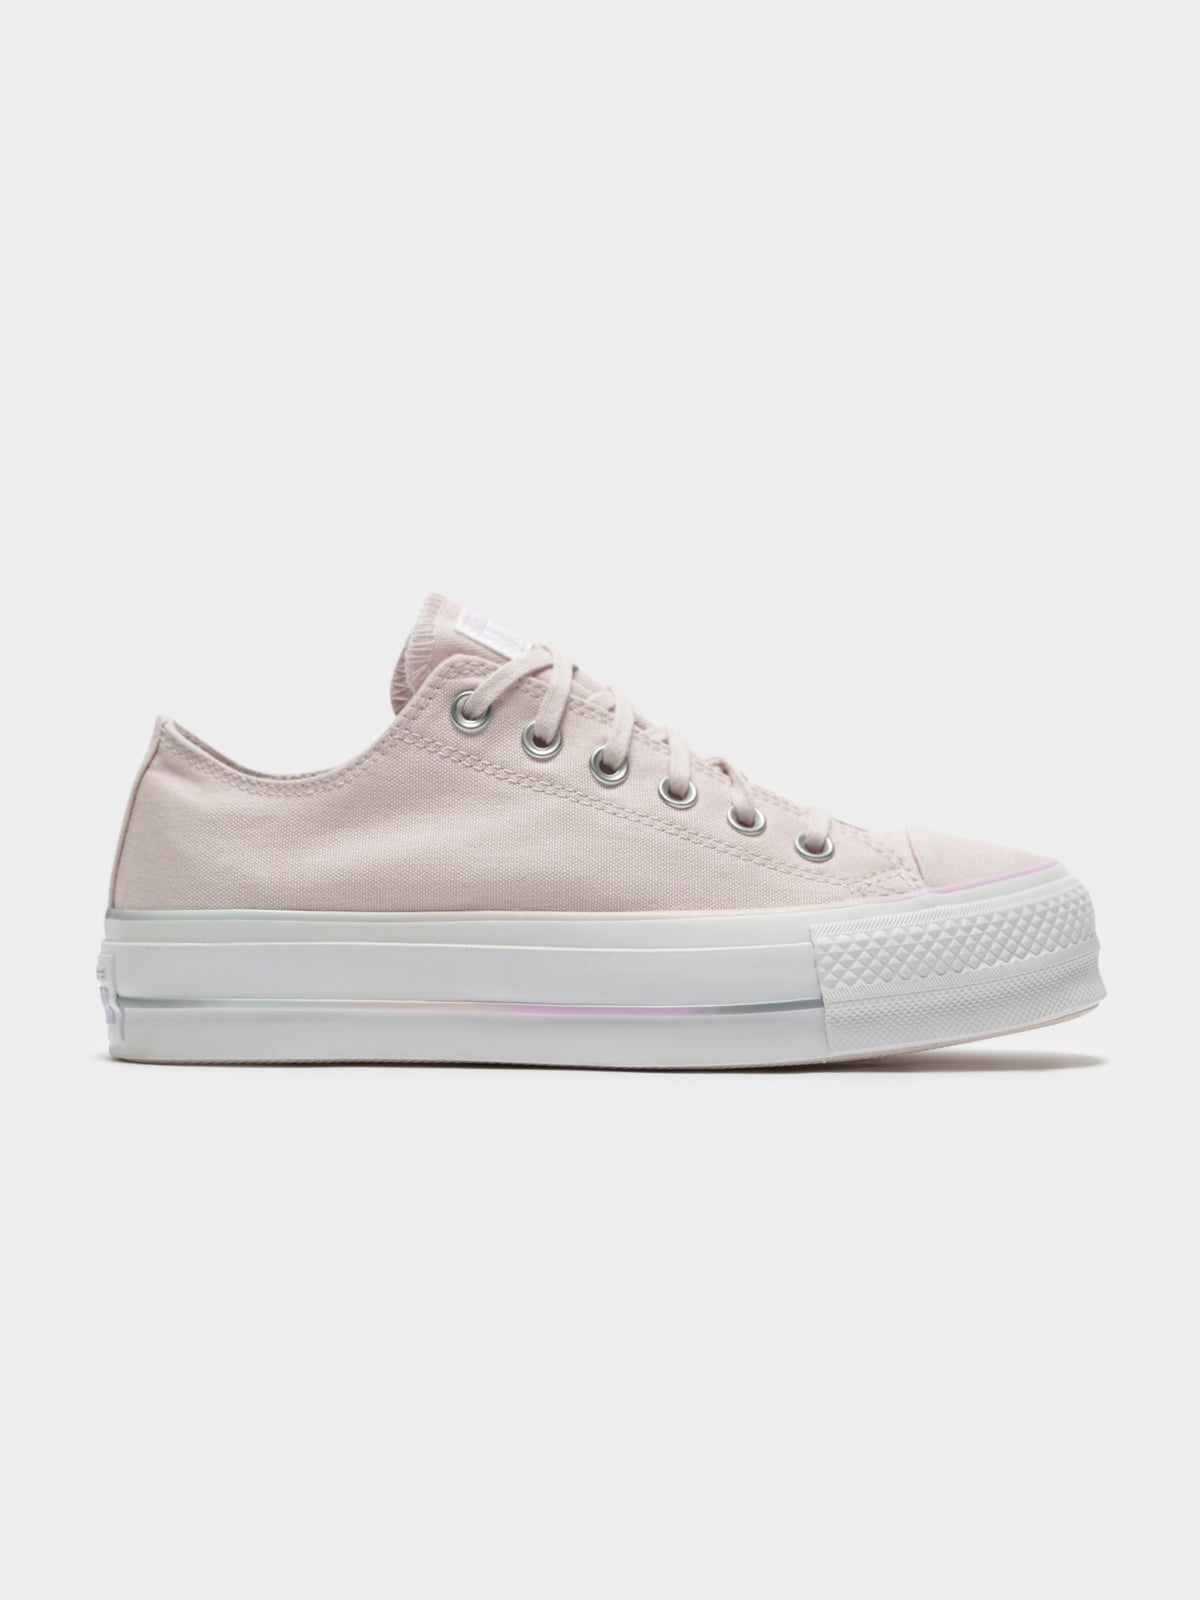 Womens Chuck Taylor All Star Lift Sneakers in Barley Rose &amp; White